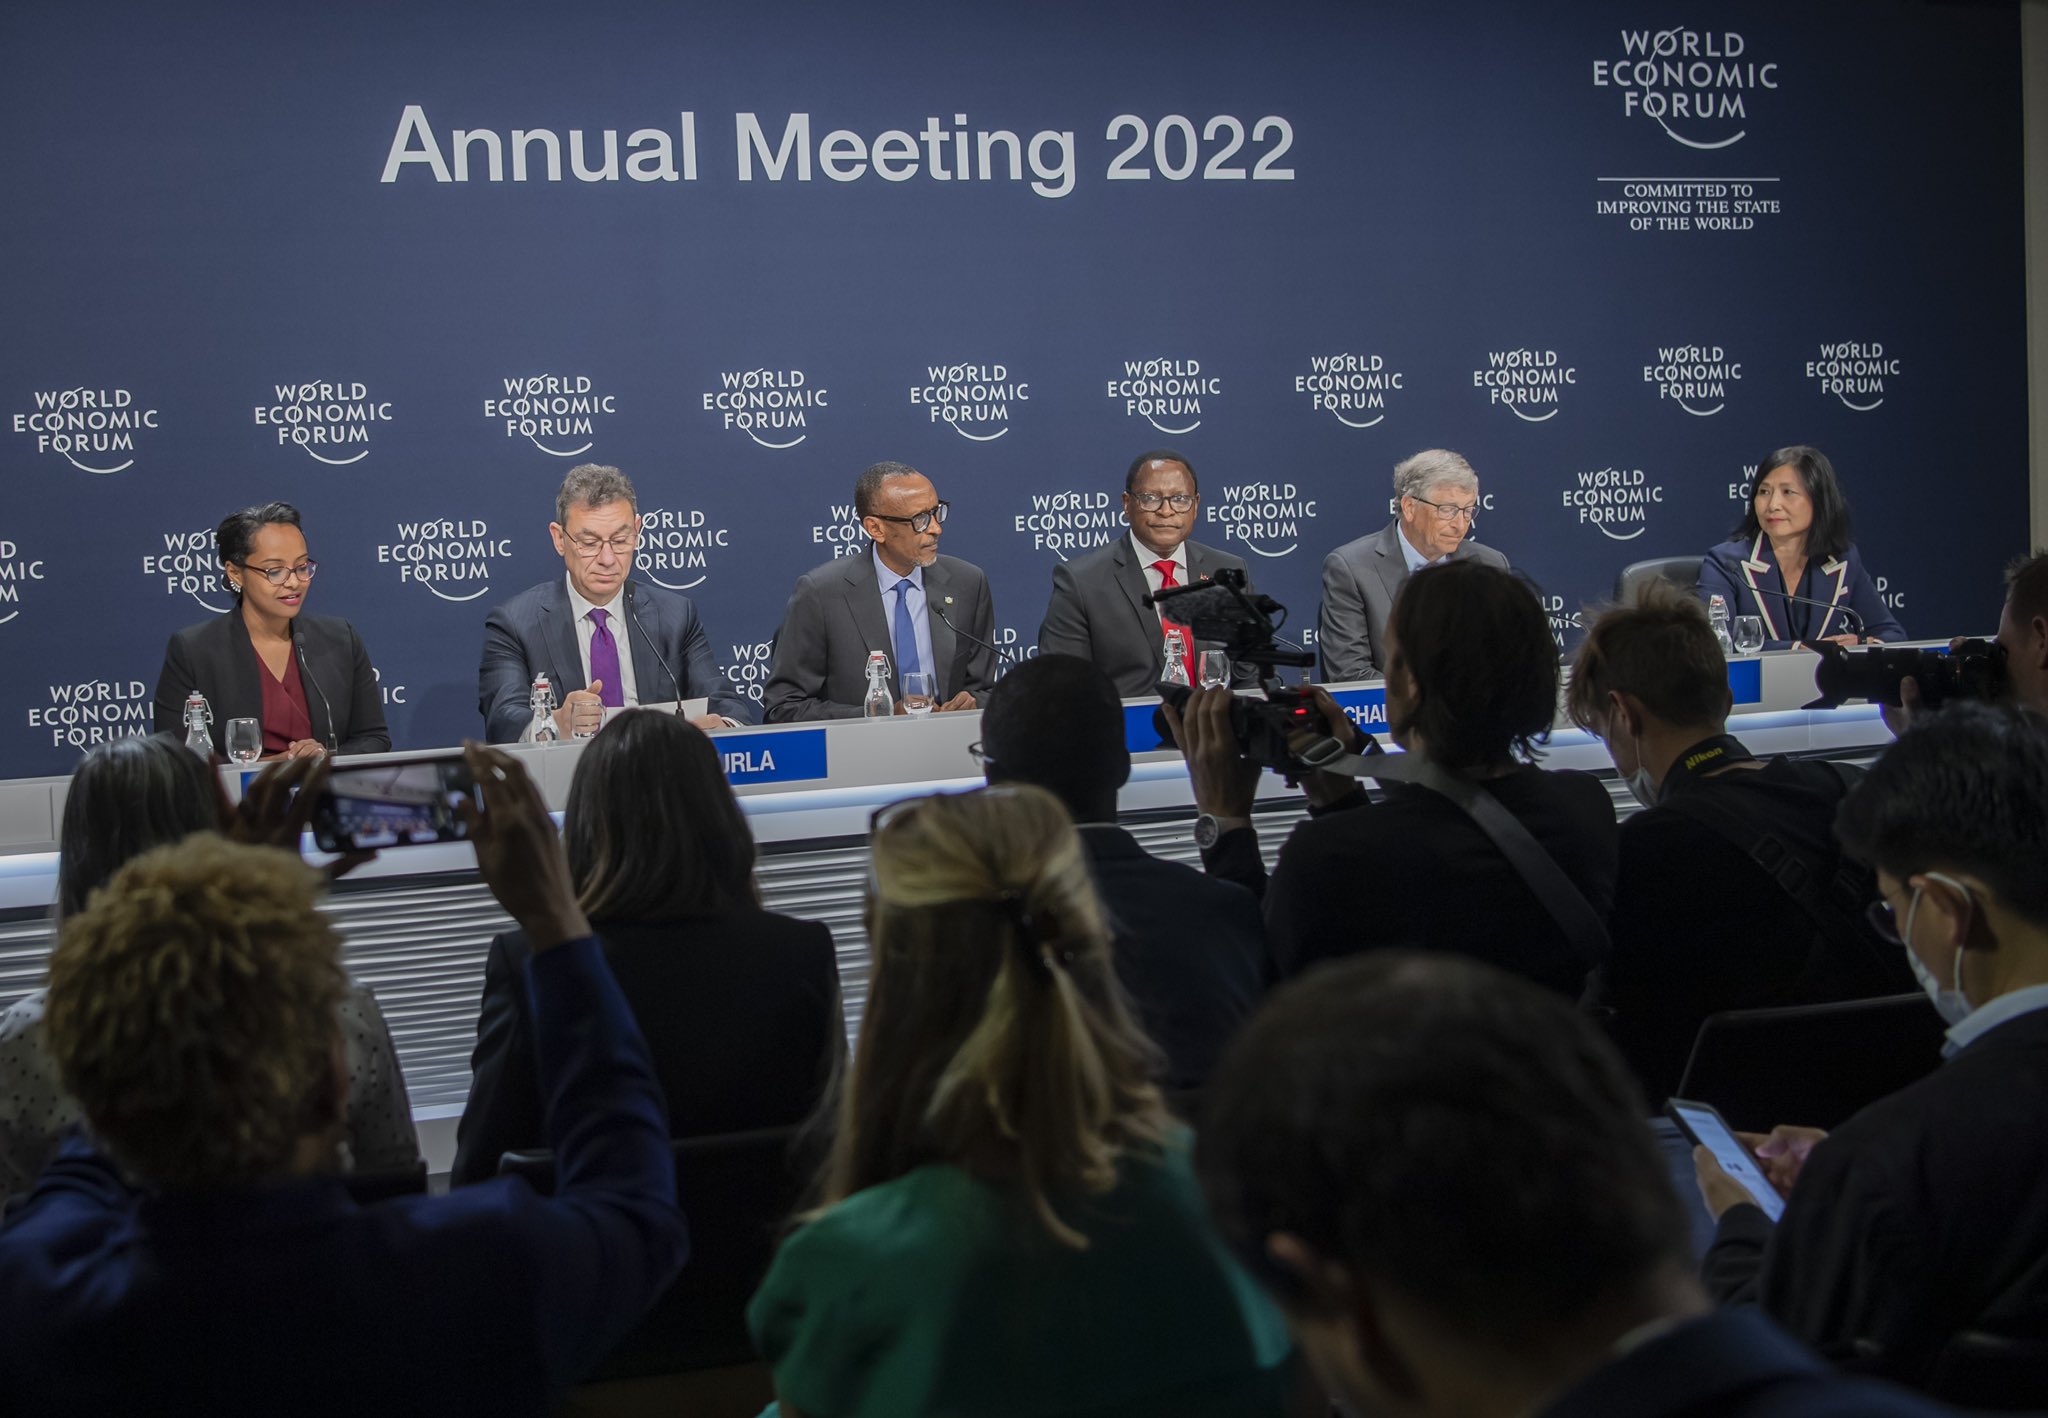 President Paul Kagame is joined by Malawiâ€™s President Lazarus Chakwera, Bill Gates, and Pfizer top management during a news conference to announce Pfizerâ€™s commitment to make all of its patented medicines and vaccines available at a not-for-profit price to 45 developing countries, in Davos, Switzerland on Wednesday, May 25.  Kagame said that rapid and affordable access  to the most advanced medicines and vaccines is a cornerstone of global health equity.  Photo: Village Urugwiro.